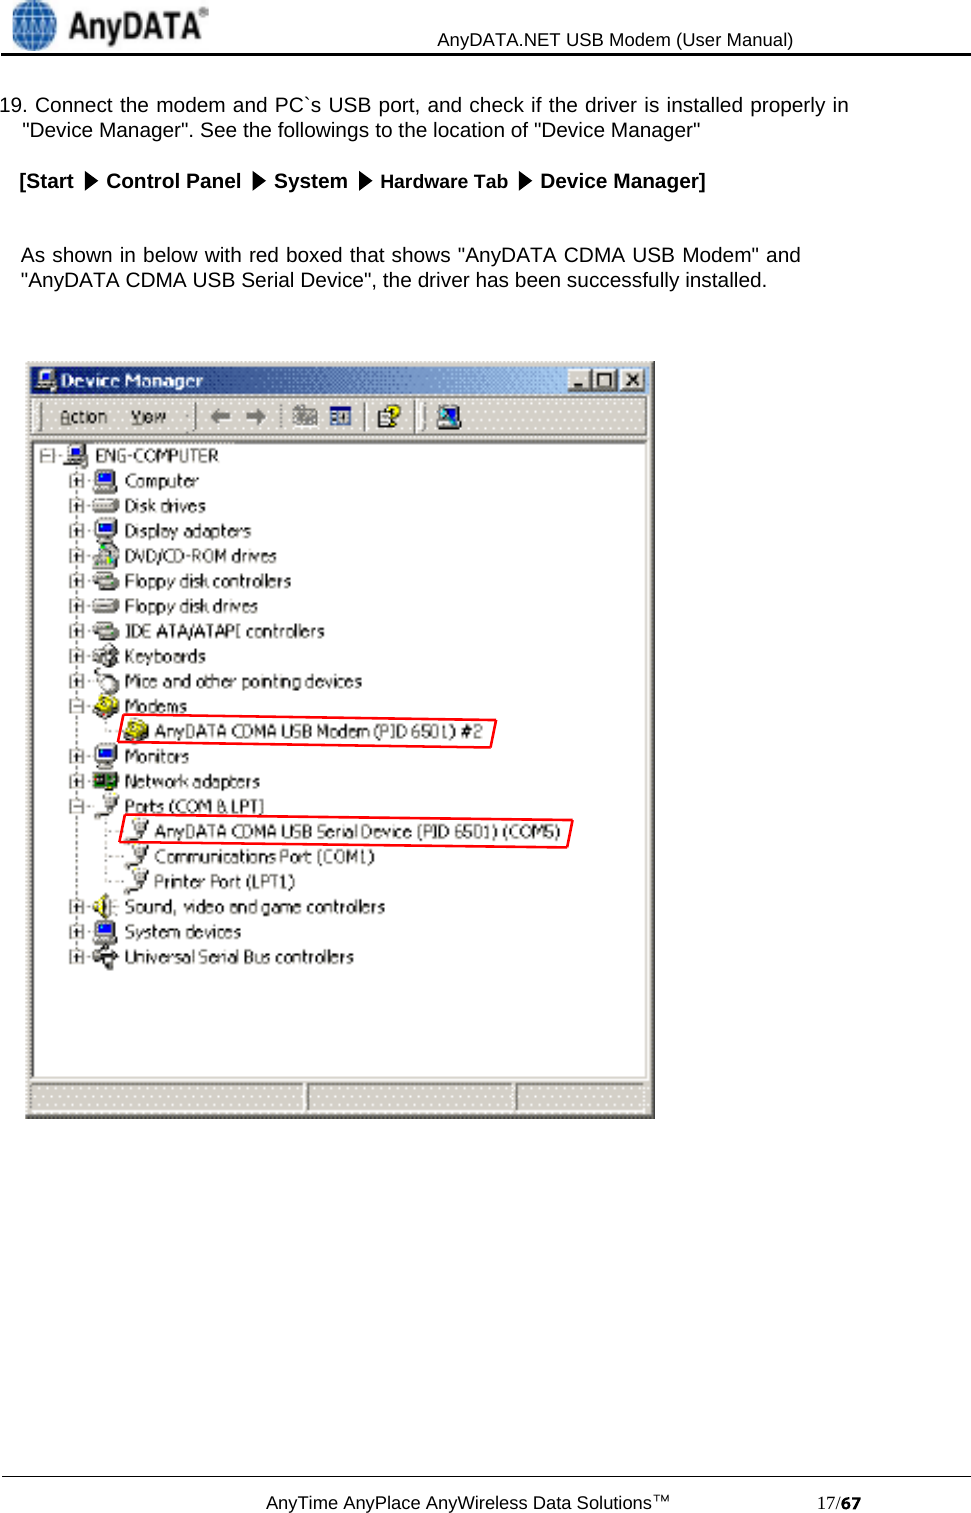                                             AnyDATA.NET USB Modem (User Manual)AnyTime AnyPlace AnyWireless Data Solutions™                            17/19. Connect the modem and PC`s USB port, and check if the driver is installed properly in    &quot;Device Manager&quot;. See the followings to the location of &quot;Device Manager&quot;[Start   Control Panel   System   Hardware Tab   Device Manager]As shown in below with red boxed that shows &quot;AnyDATA CDMA USB Modem&quot; and&quot;AnyDATA CDMA USB Serial Device&quot;, the driver has been successfully installed.